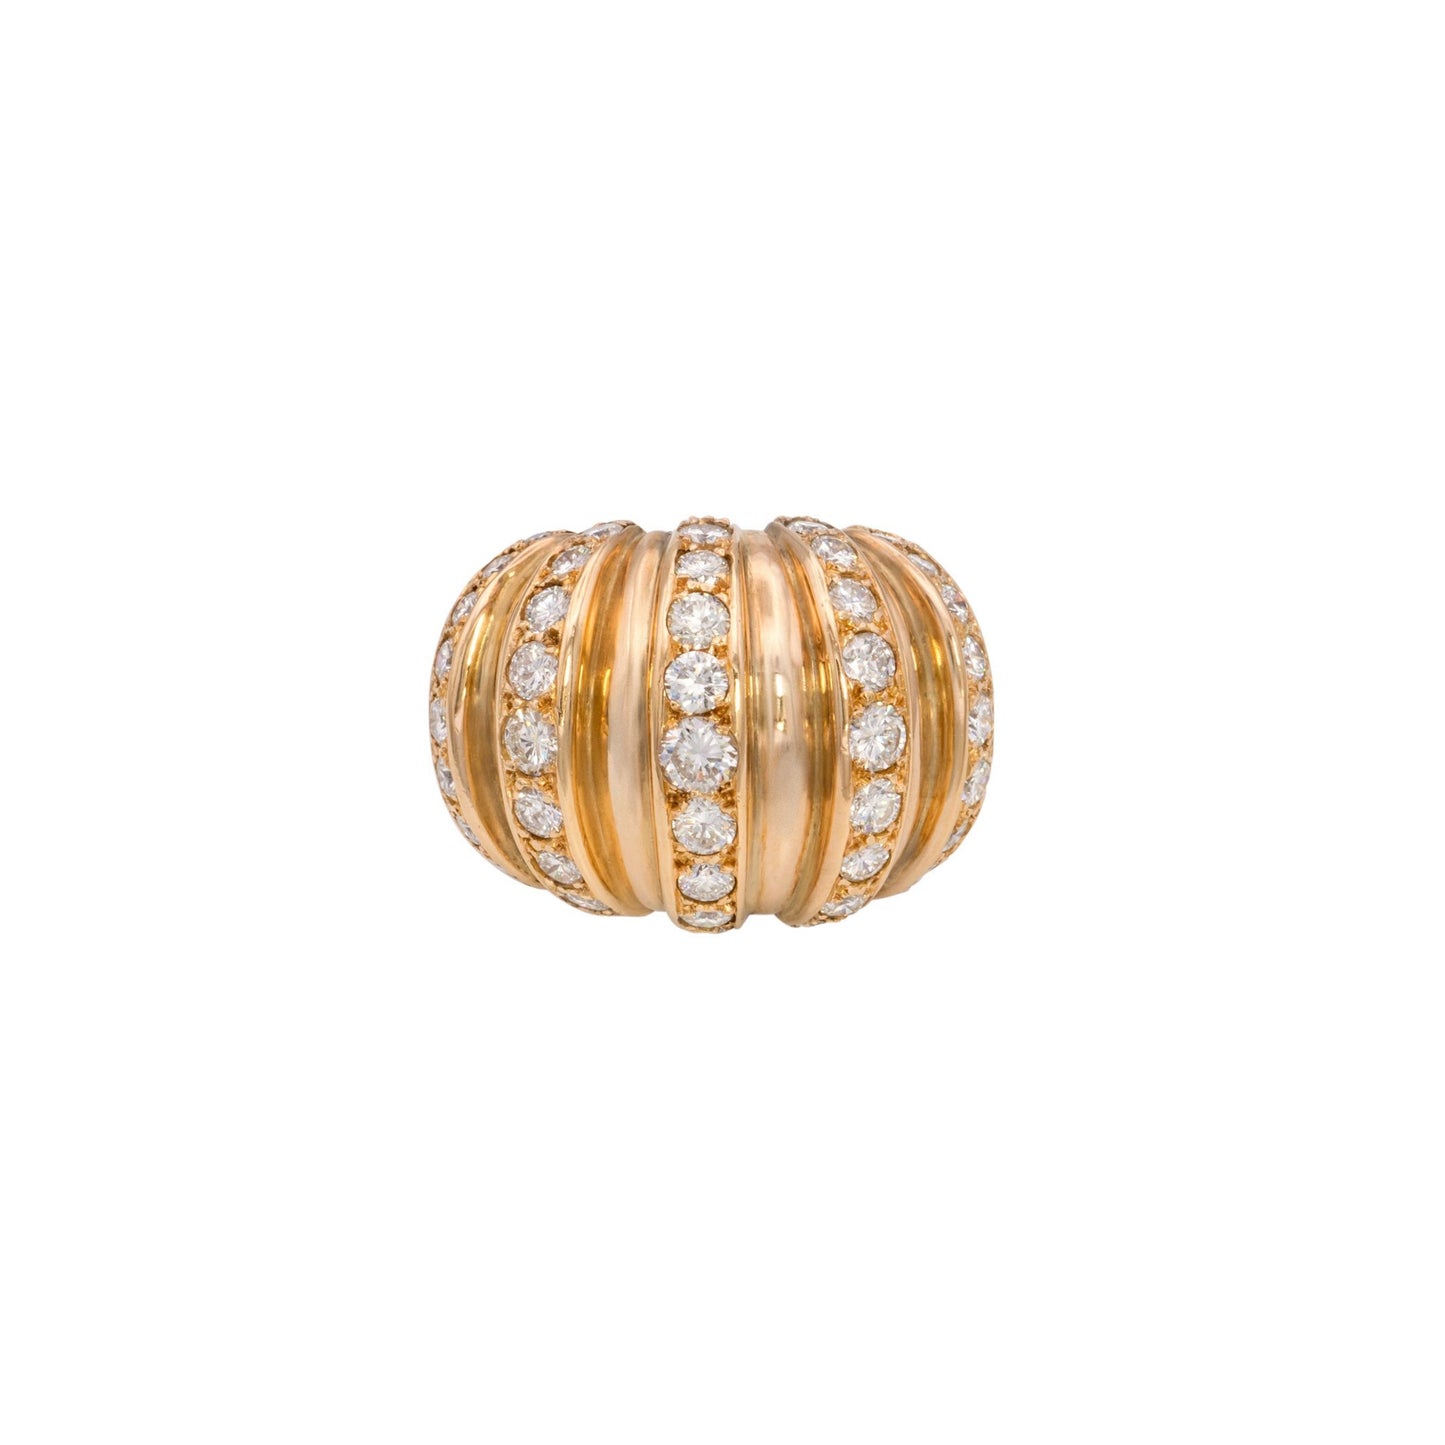 French 1950s 18KT Yellow Gold Diamond Cocktail Ring front